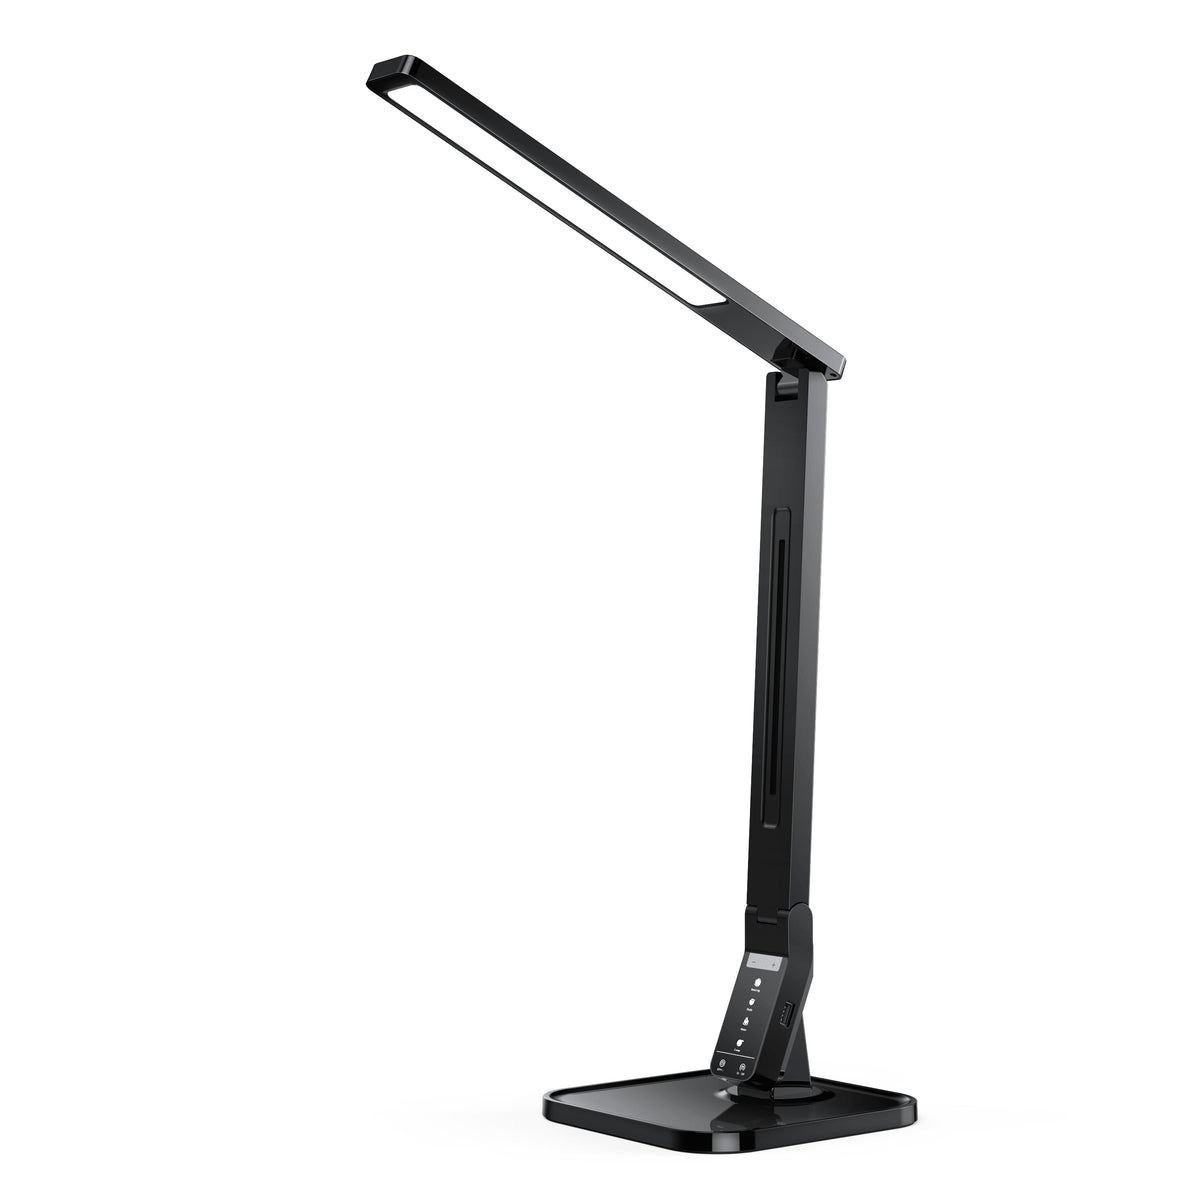 Taotronics New Classical LED Desk Lamp 01 Versatile Adjustable with 4 Lighting Modes and 5 Brightness Levels